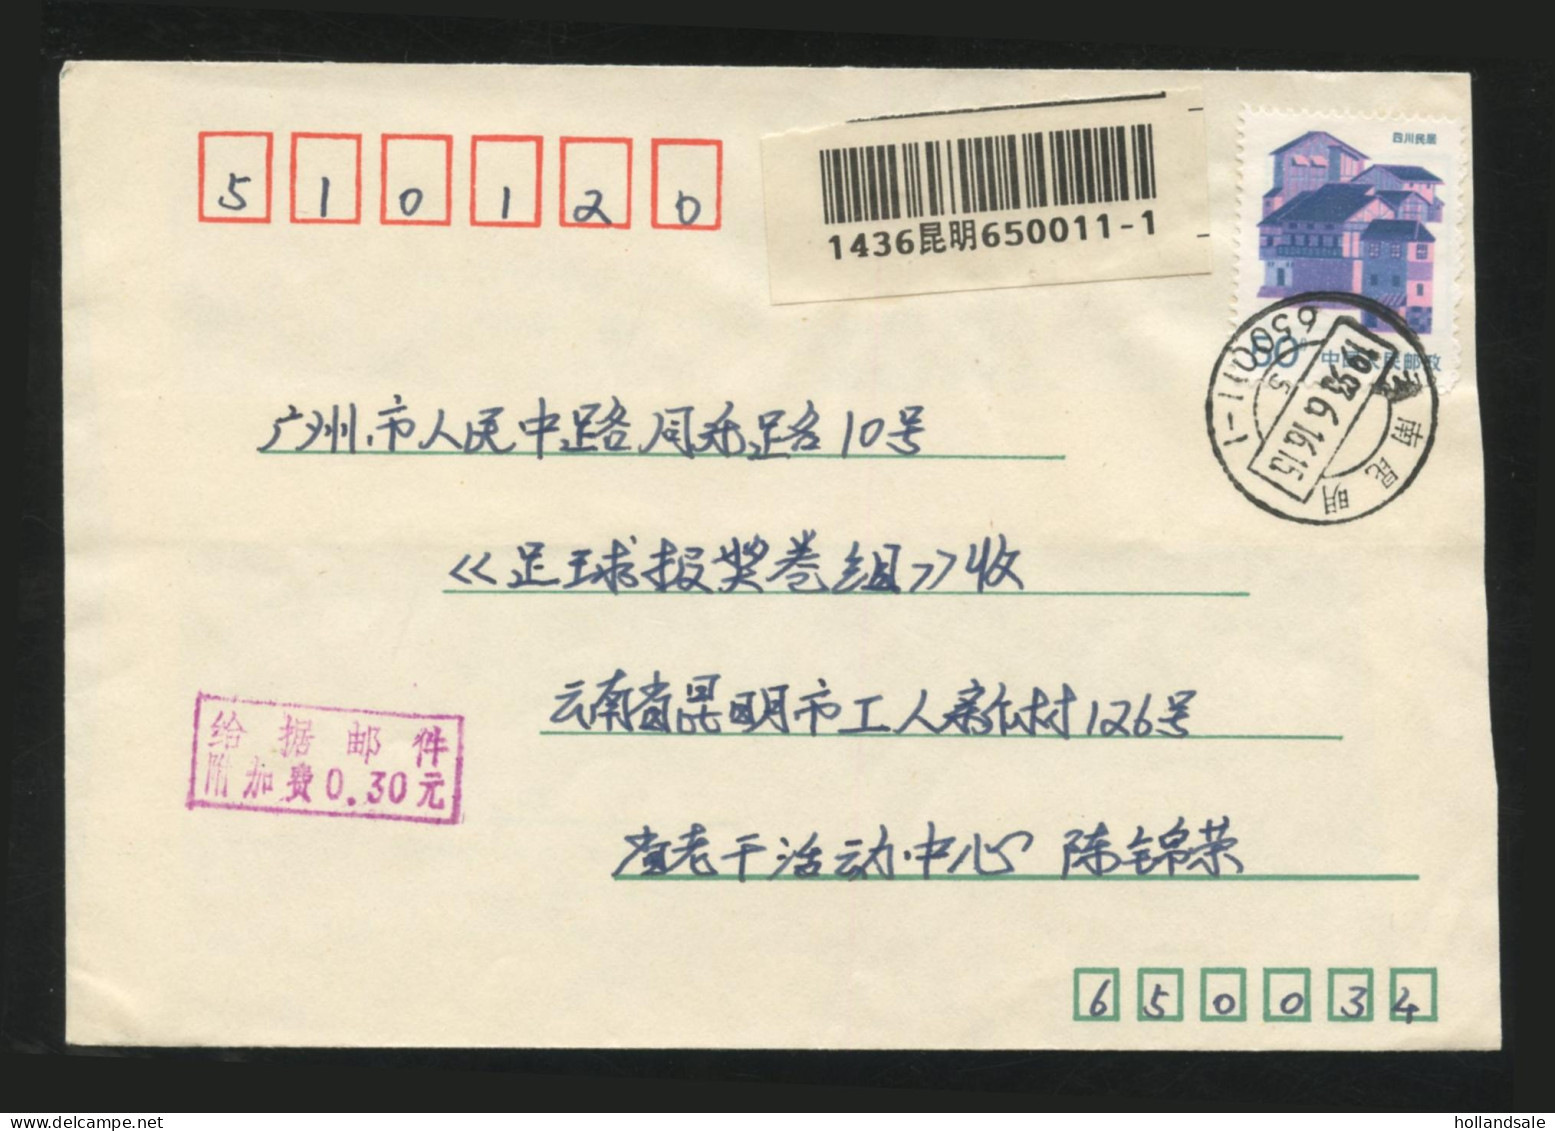 CHINA PRC / ADDED CHARGE - Cover Sent From Kunming To Guangzhou. Violet 30f AC Chop. - Segnatasse